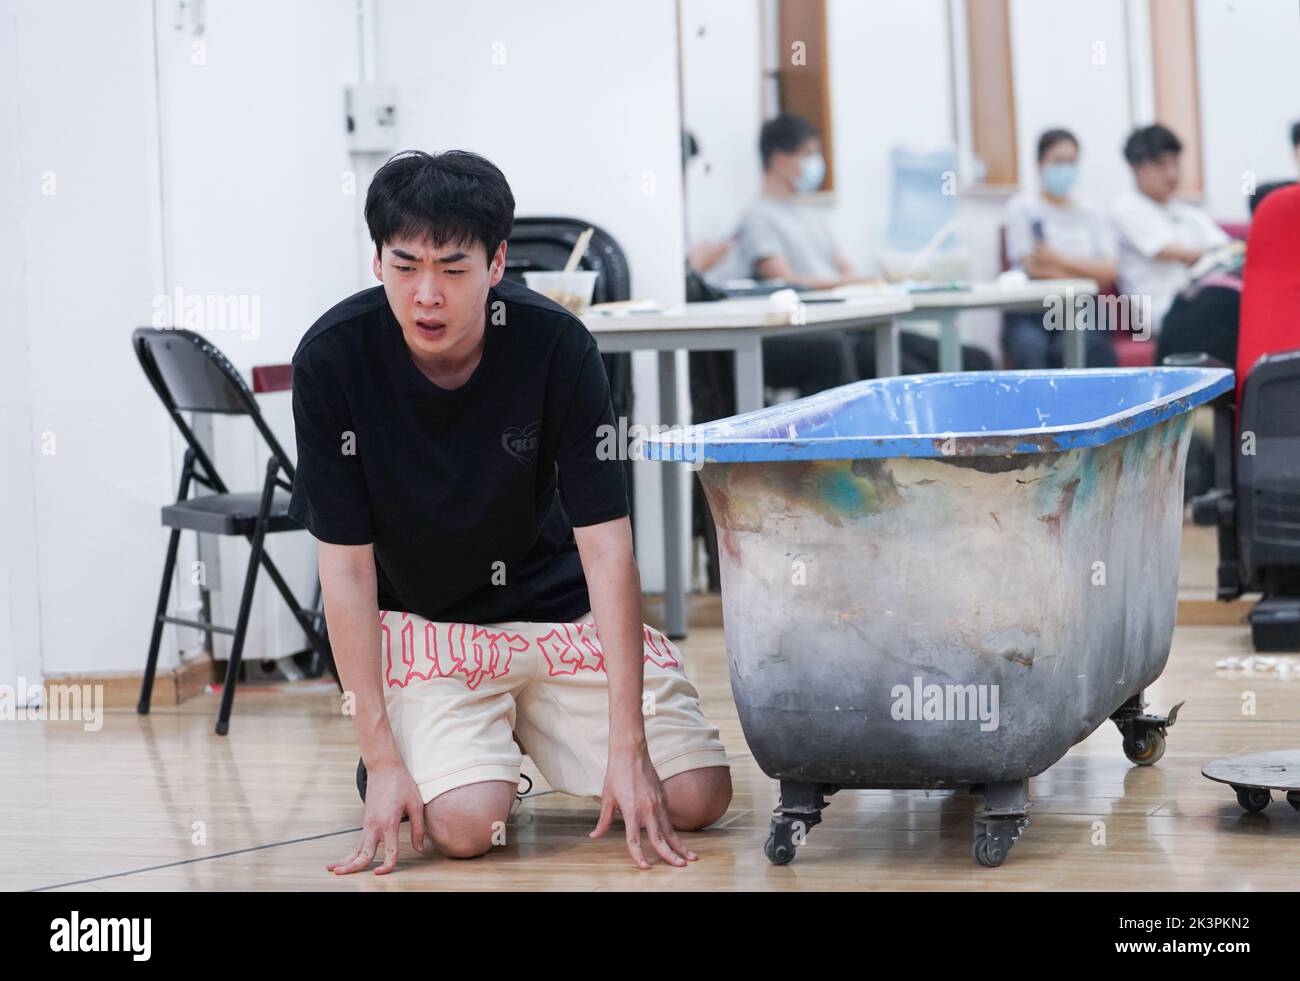 Beijing, China. 13th Sep, 2022. Wang Guang rehearses an avant-garde drama in the rehearsal room of Star Theater in Beijing, capital of China, Sept. 13, 2022. TO GO WITH 'Across China: Beijing hutong theater dedicated to avant-garde dramas' Credit: Chen Zhonghao/Xinhua/Alamy Live News Stock Photo